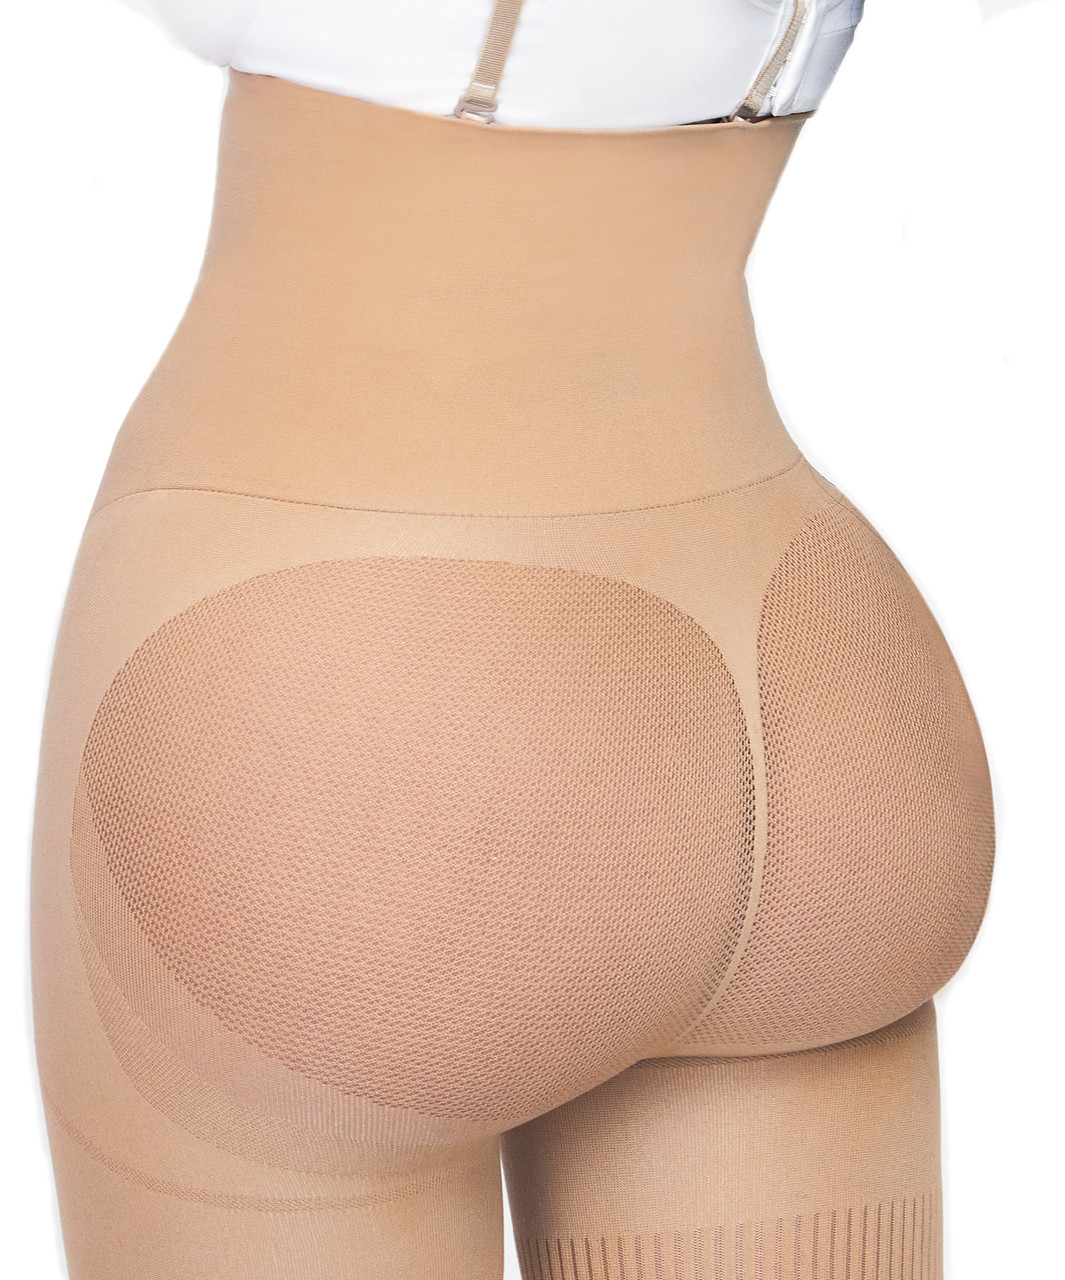 Buy 4-in-1 Shaper - Tummy, Back, Thighs, Hips - Efffective Seamless Tummy  Tucker Shapewear- Women's Control Body Shaper_Beige Color_ Fit Size 30 to  36 at